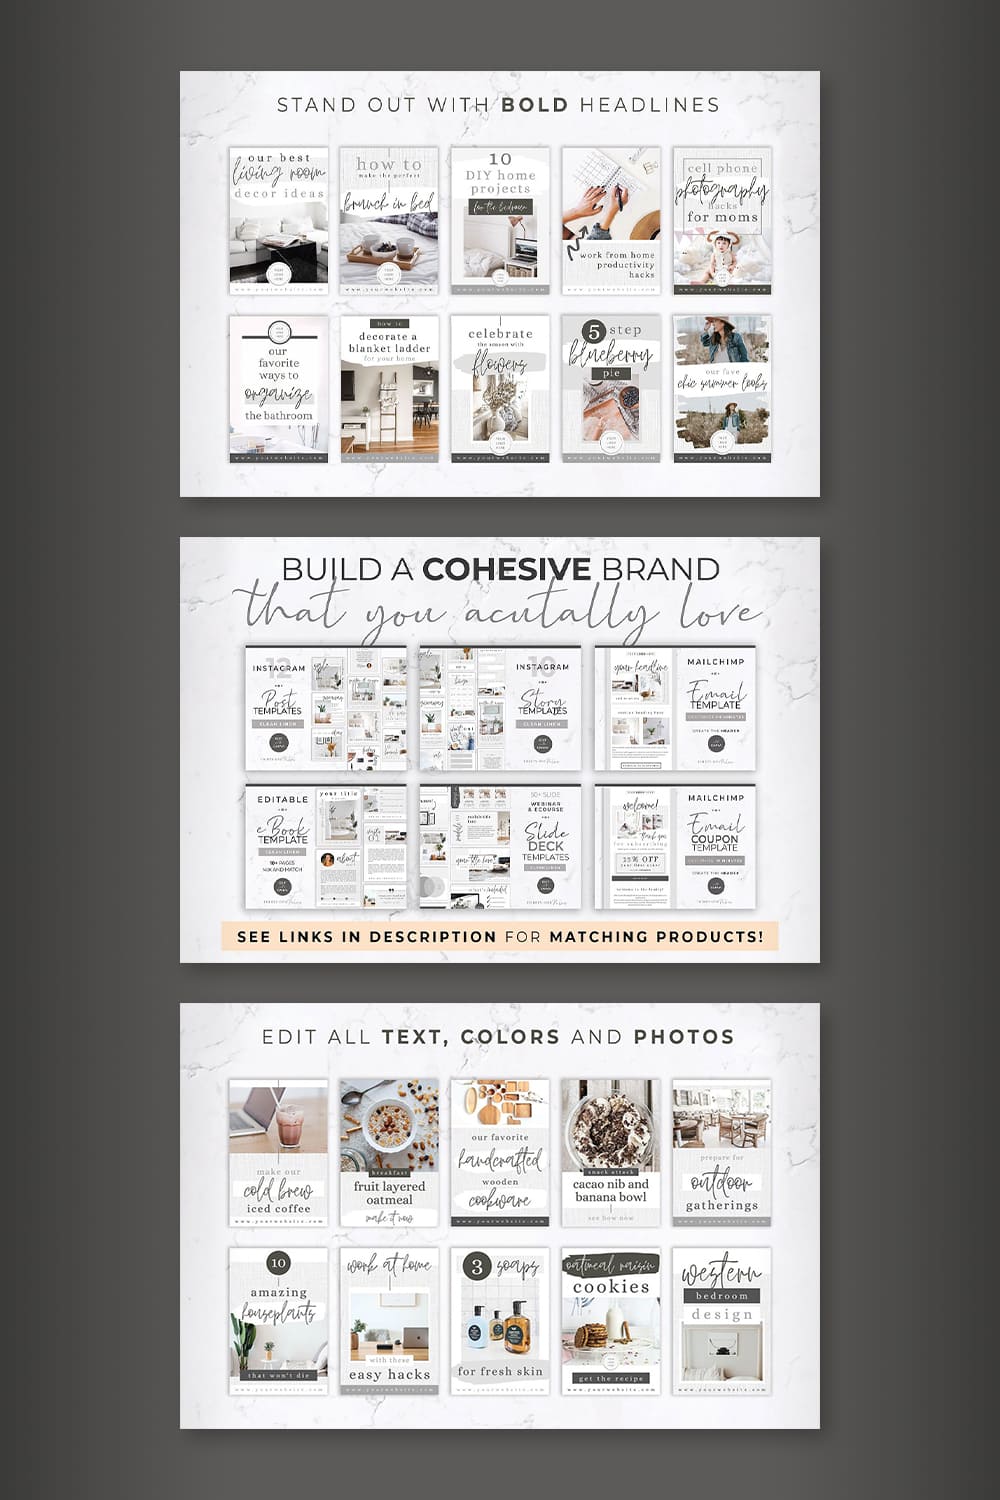 Pin Templates - "Build A Cohesive Brand".